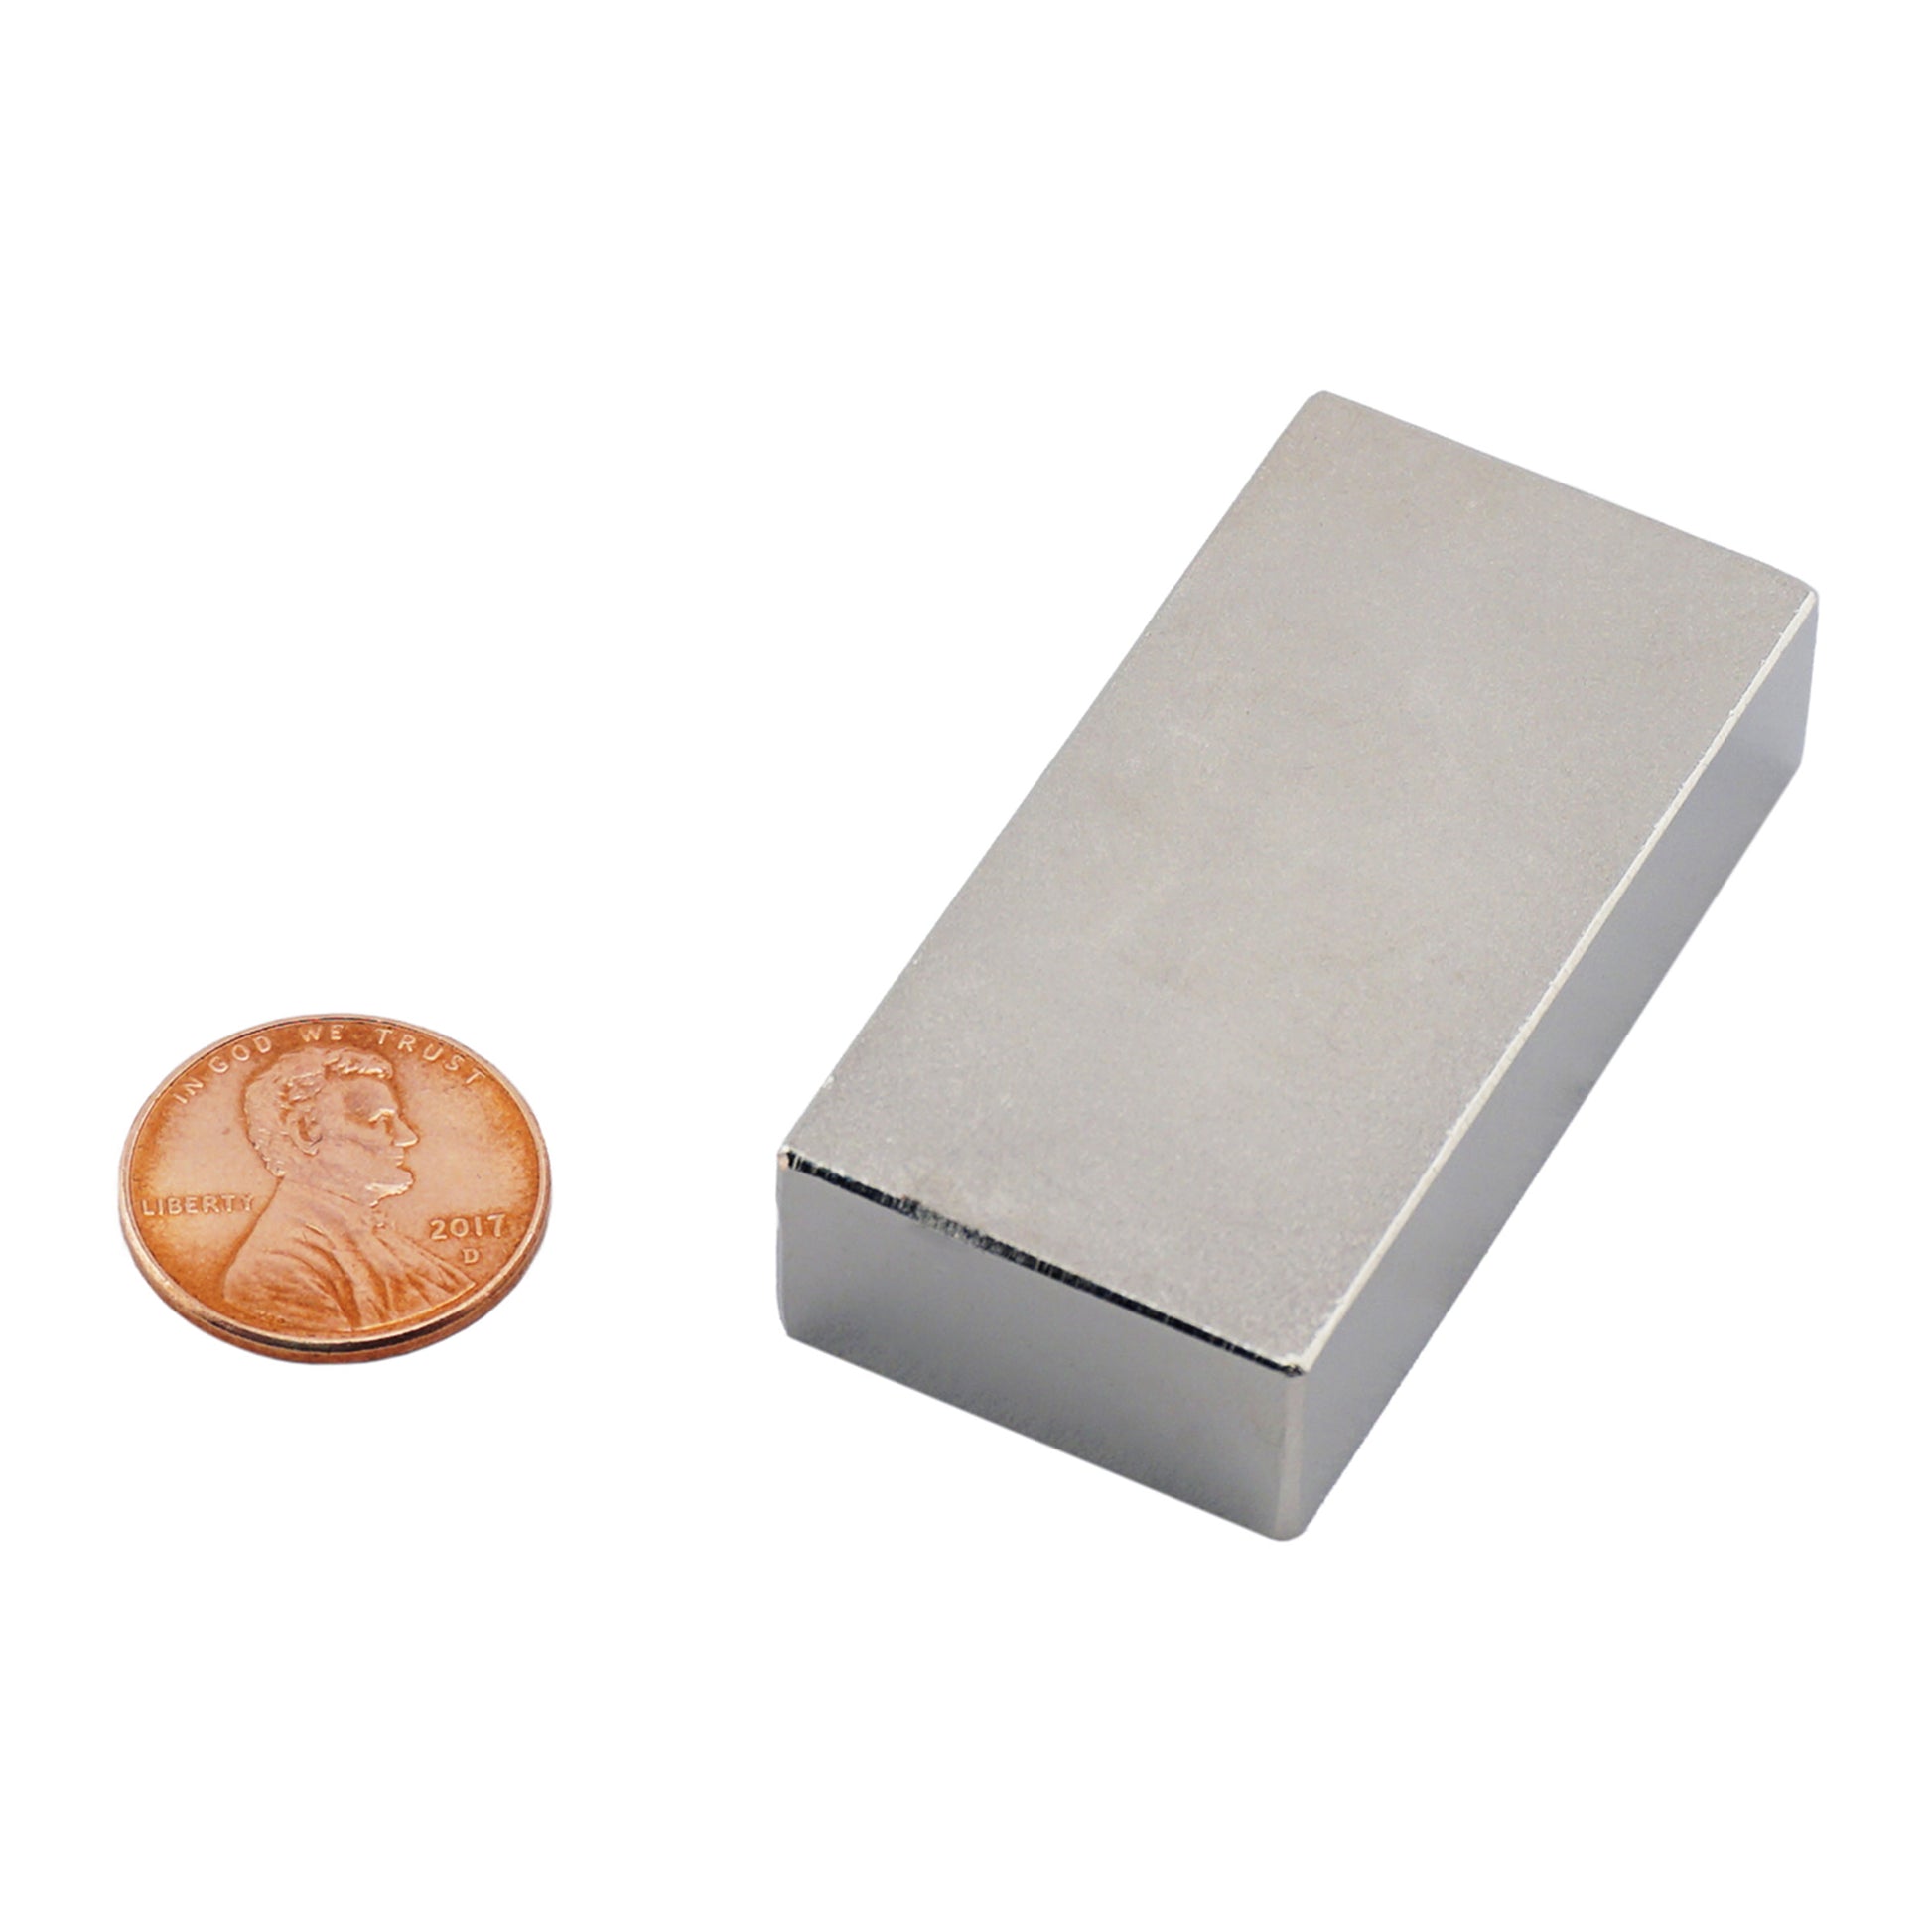 Load image into Gallery viewer, NB005030N Neodymium Block Magnet - Compared to Penny for Size Reference